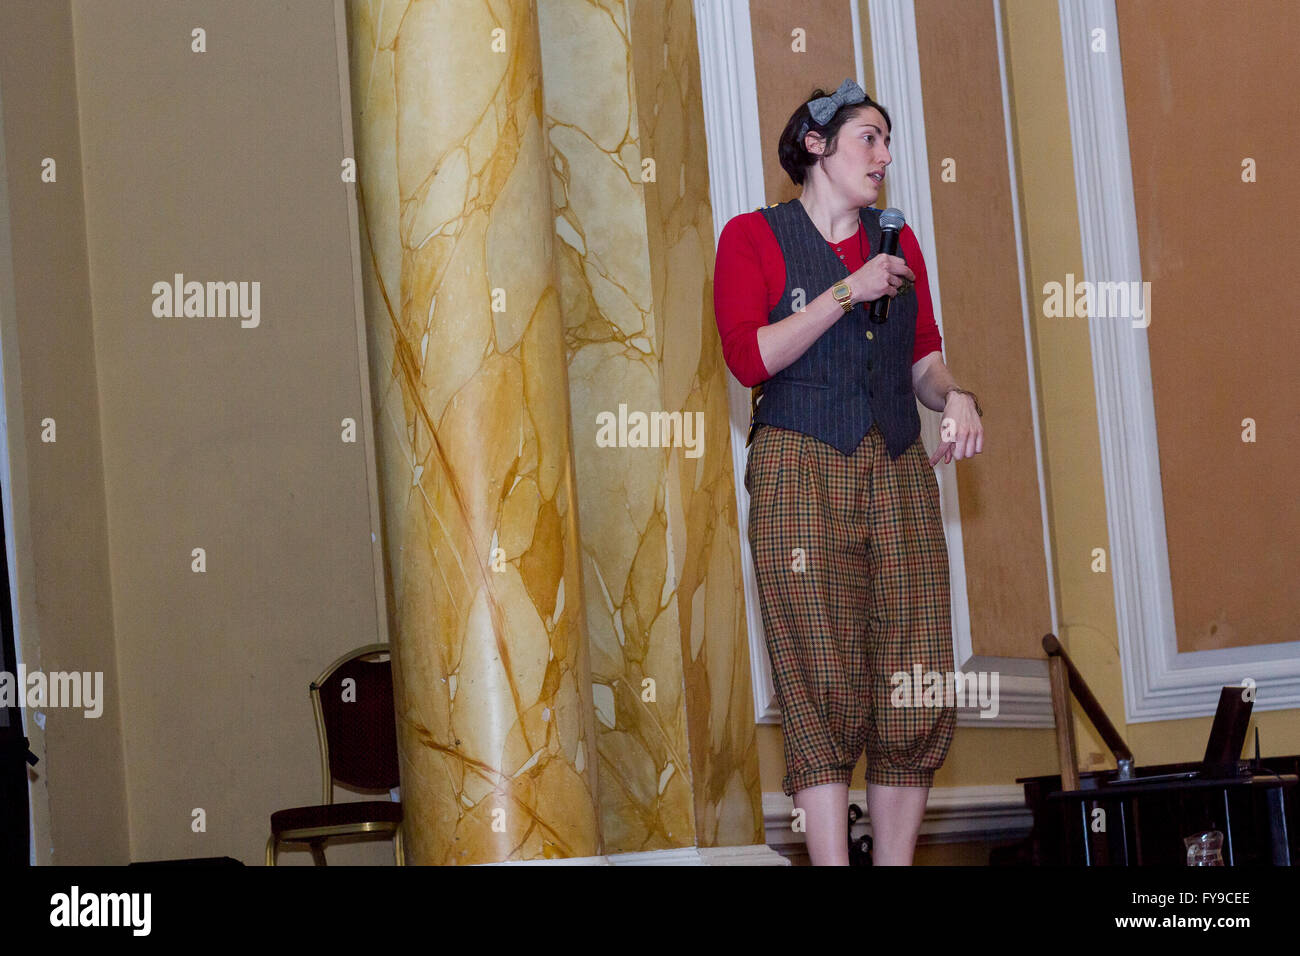 Cardiff, Wales, UK. 23rd April, 2016. Childrens litrature Festival week where they are celebrating the Harry Potter books at cardiff city hall, Wales. The proffesor of dumbledoor gives an eventful talk of all harry potter books. Credit:  Charley Howells/Alamy Live News Stock Photo